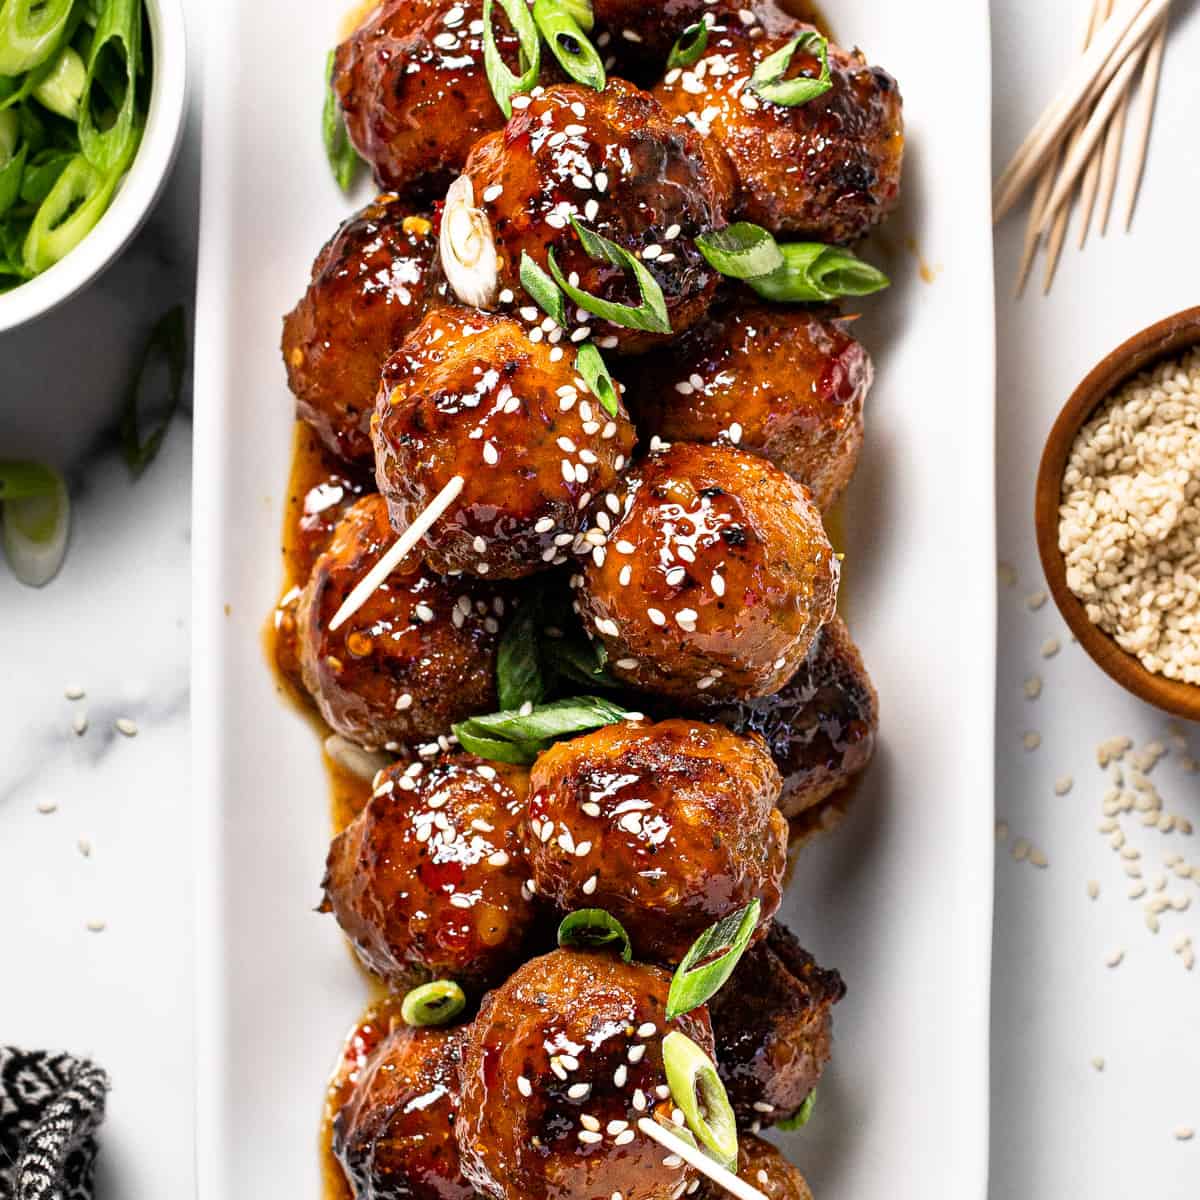 Chili Lime Party Meatball Appetizer